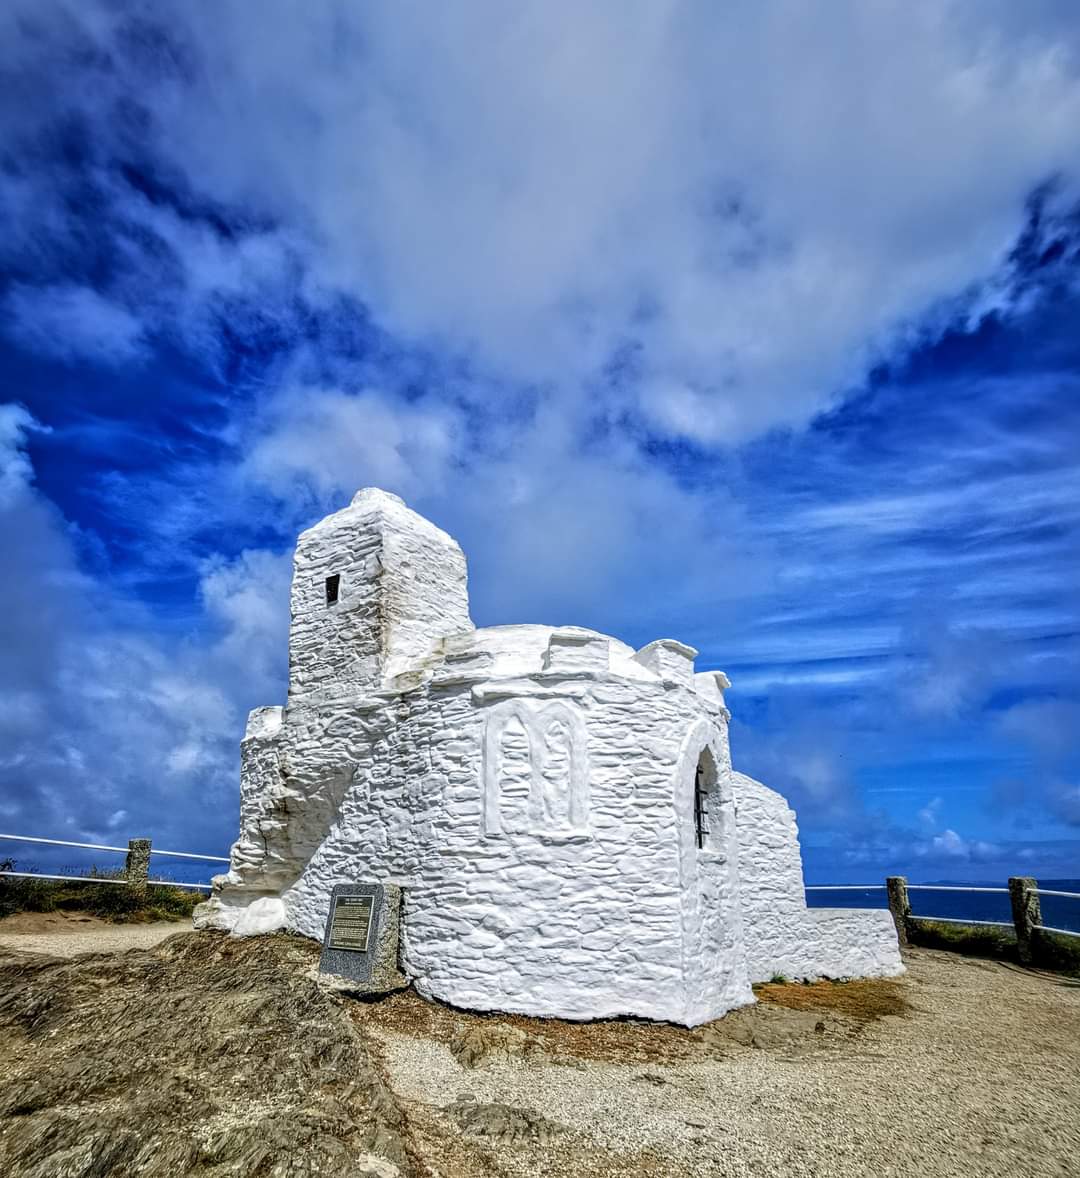 Just checked on the Hut & had a bit of a tidy up, looking as stunning as ever!😍
.
#HuersHut #Heritage #Newquay #Cornwall
#lovewhereyoulive #kernowfornia #NewquayTownCouncil